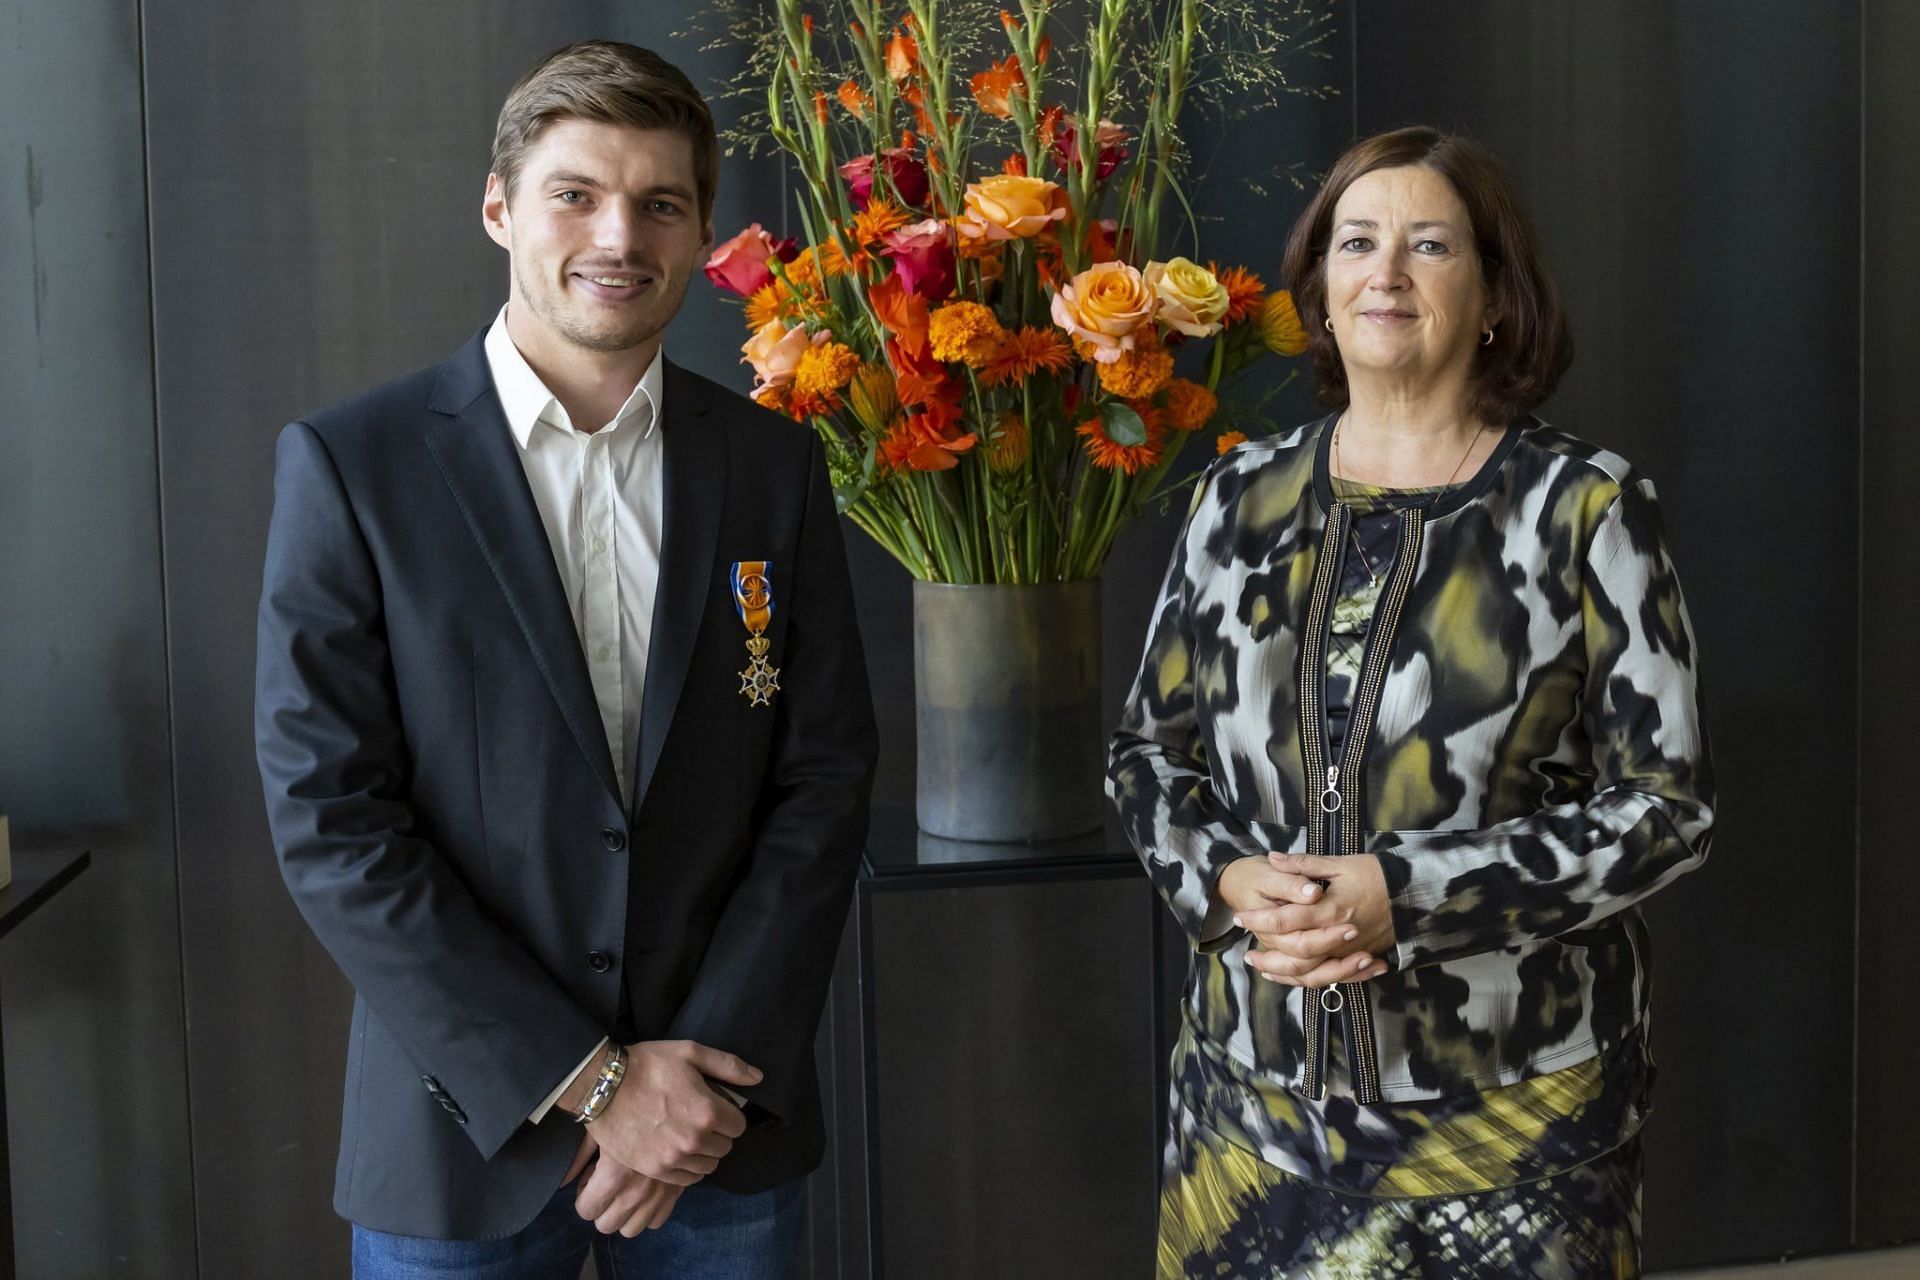 Max Verstappen has received a special honor from the Dutch royal family